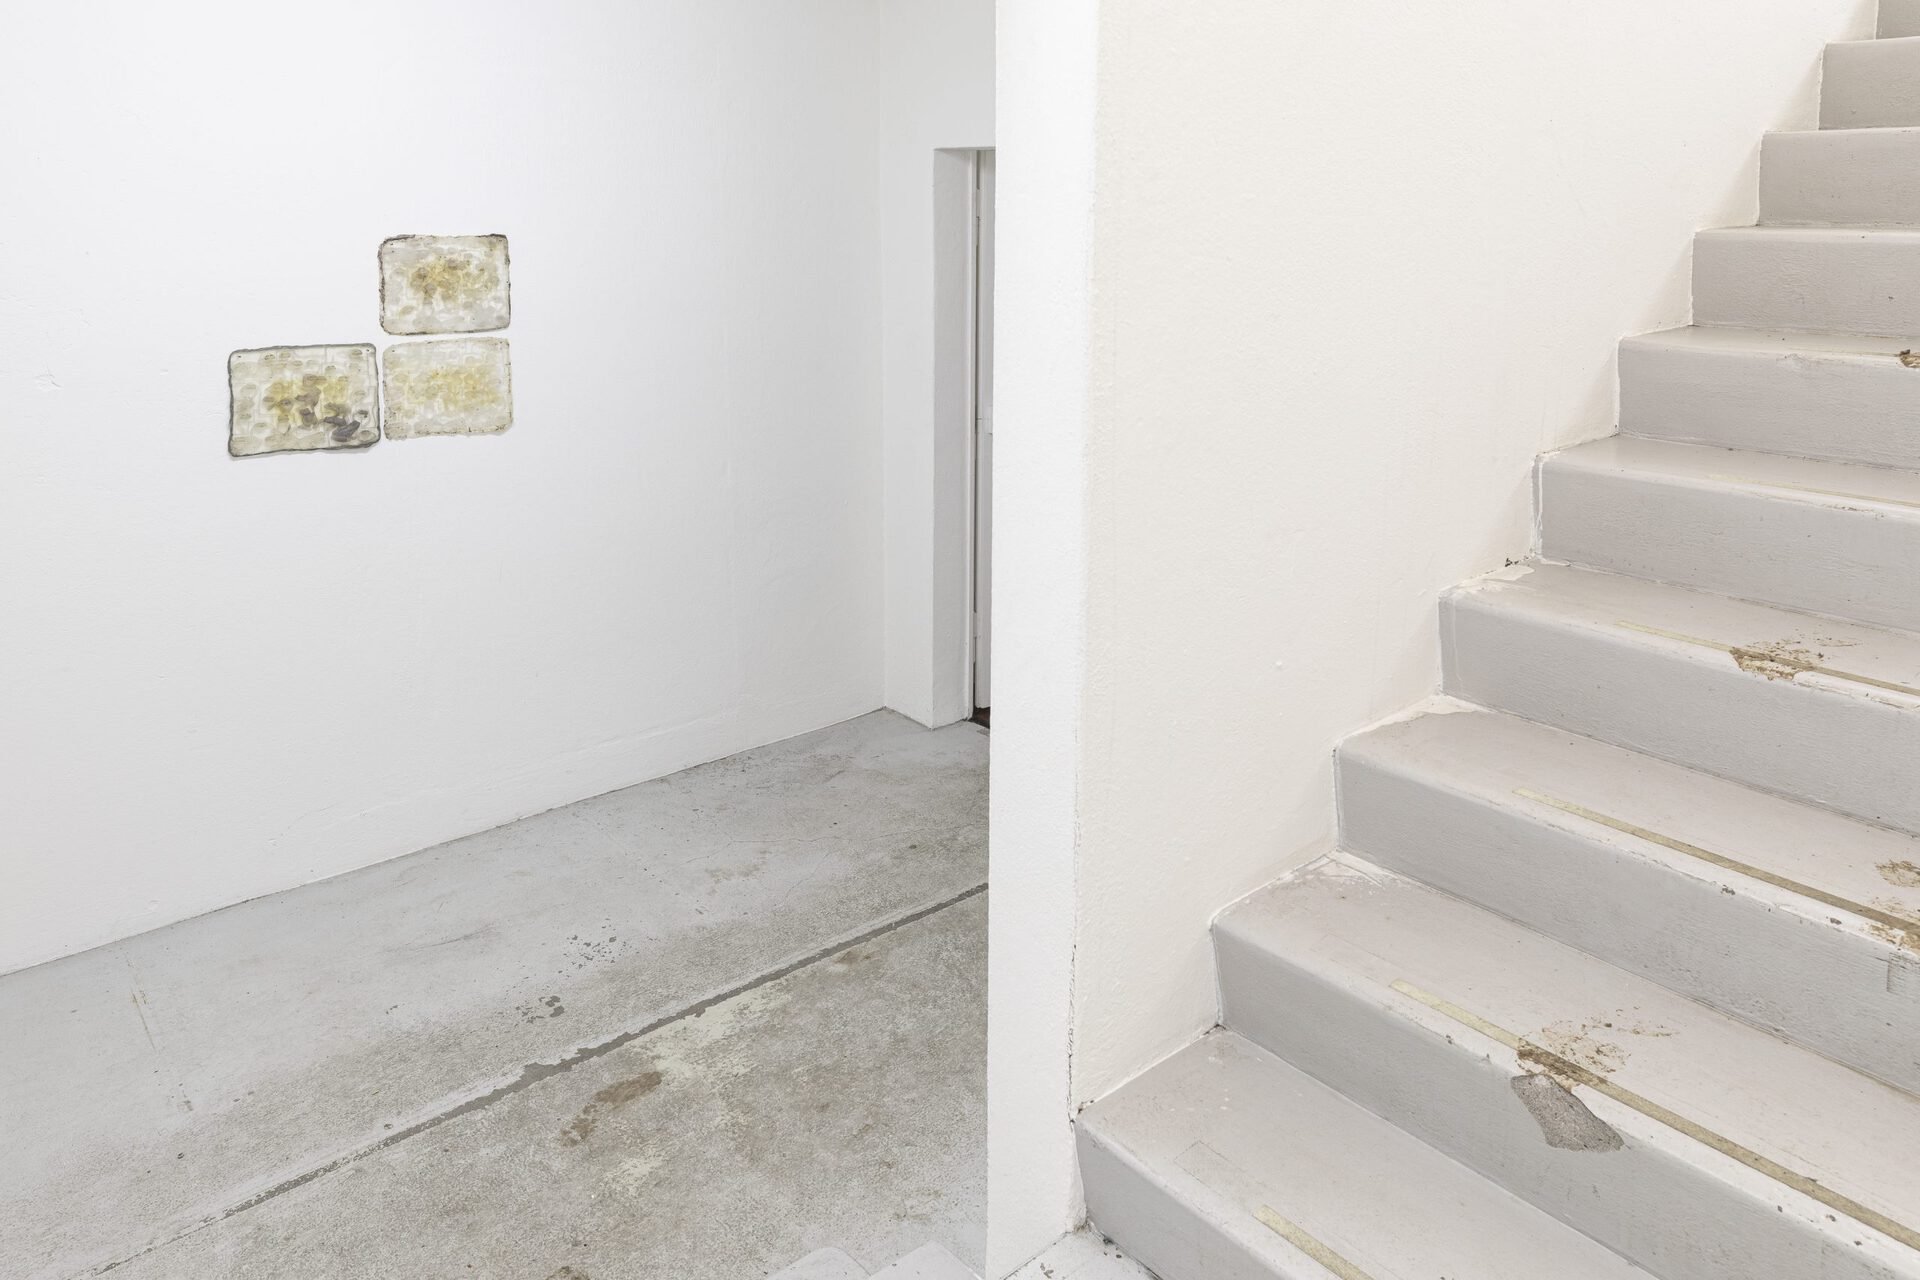 Left: Marlijn Karsten, labyrinth/Maze, 2020, epoxy, clay, plasticine, silicone, dimension variable; Right: Marlijn Karsten, Someone had a talk on Zoom which i couldn’t attend, 2021, dirt, dimension variable